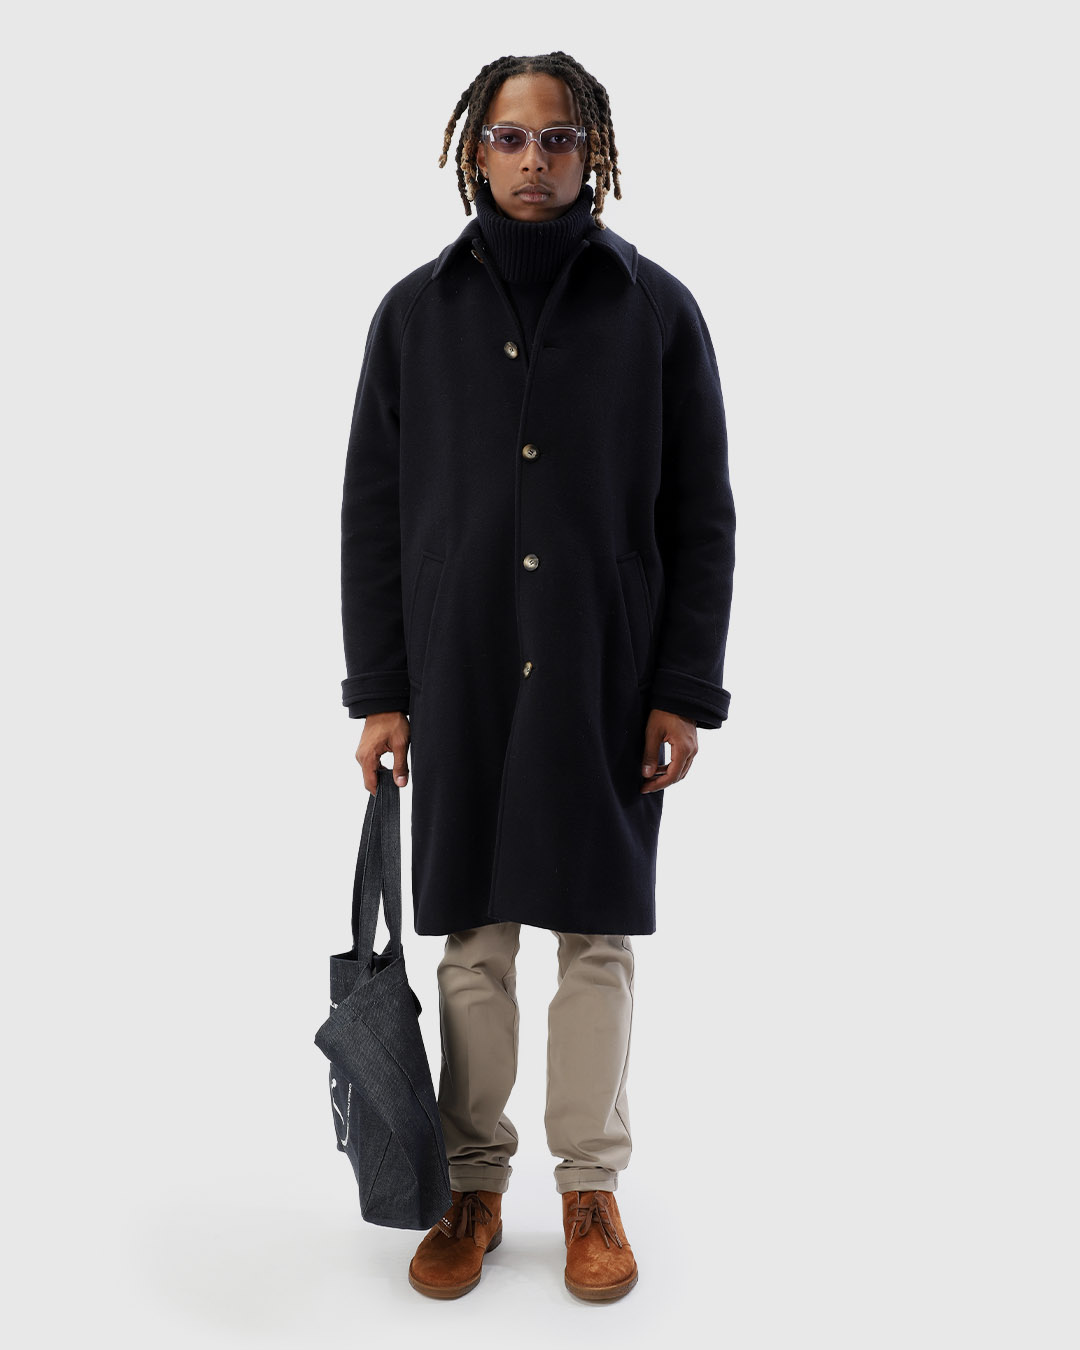 FOREVER CLASSIC, A.P.C. FW 22